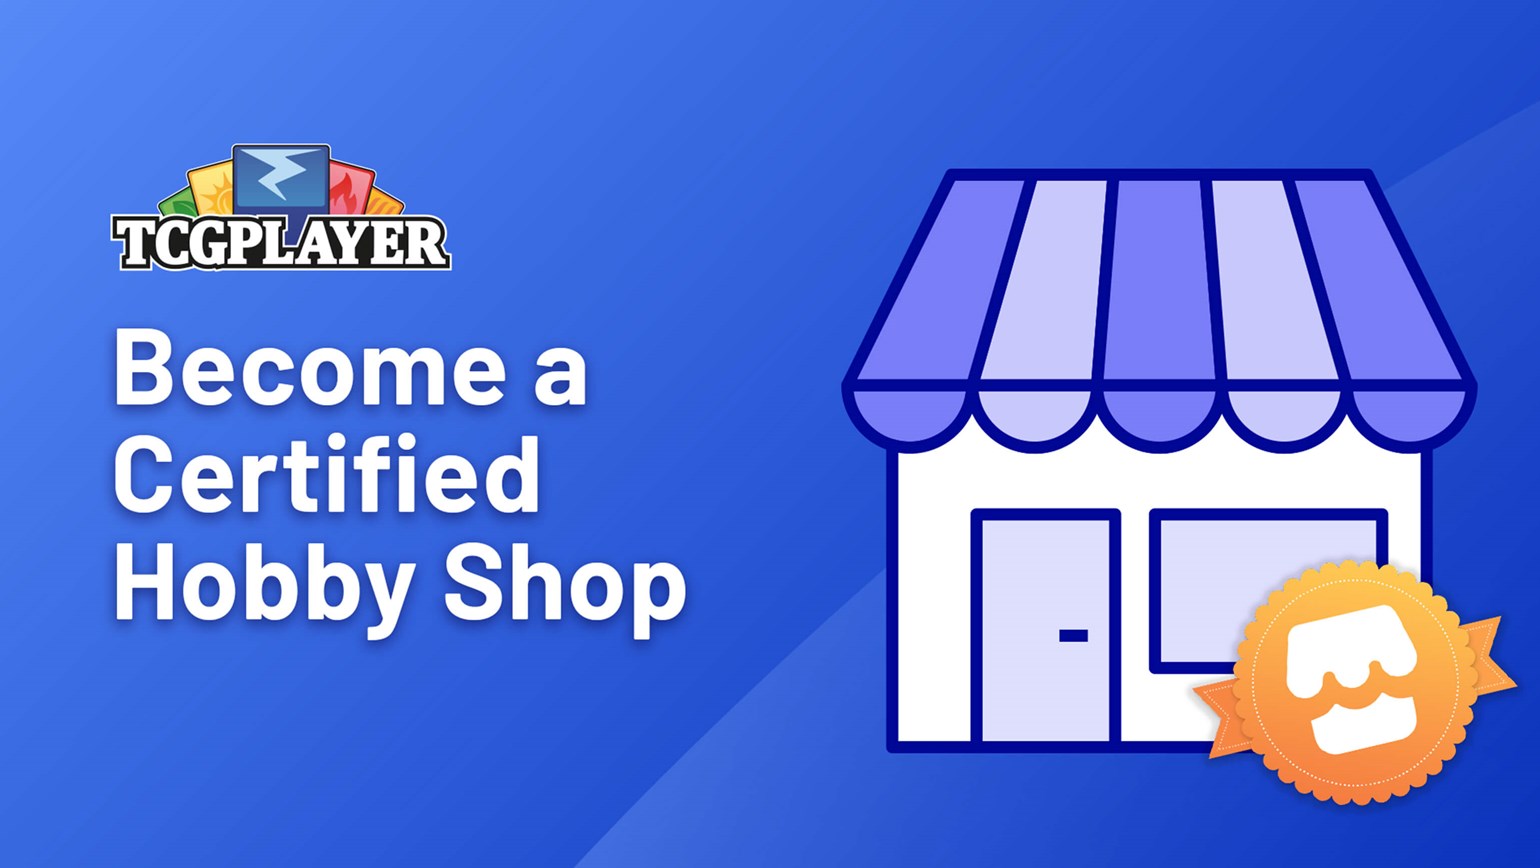 Why You Should Become a Certified Hobby Shop